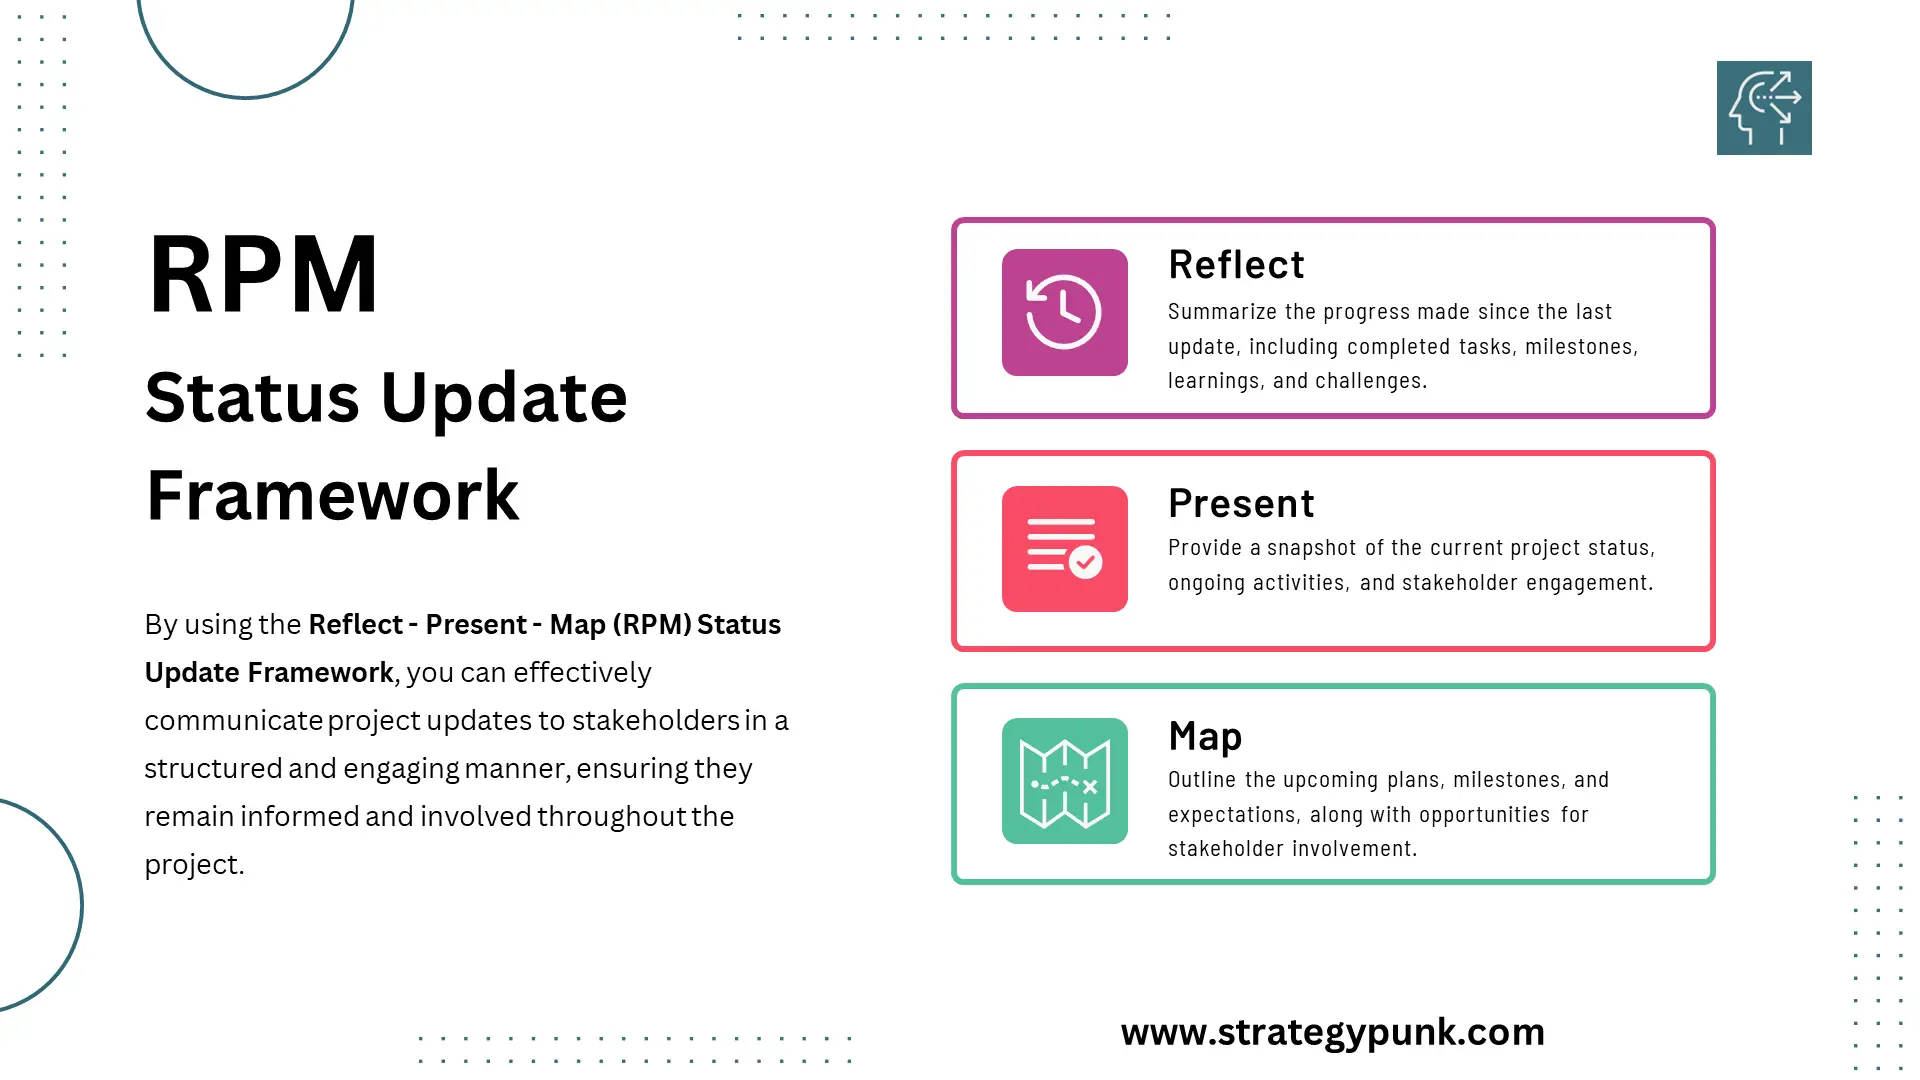 Supercharge Your Stakeholder Communications with the RPM Status Update Framework!